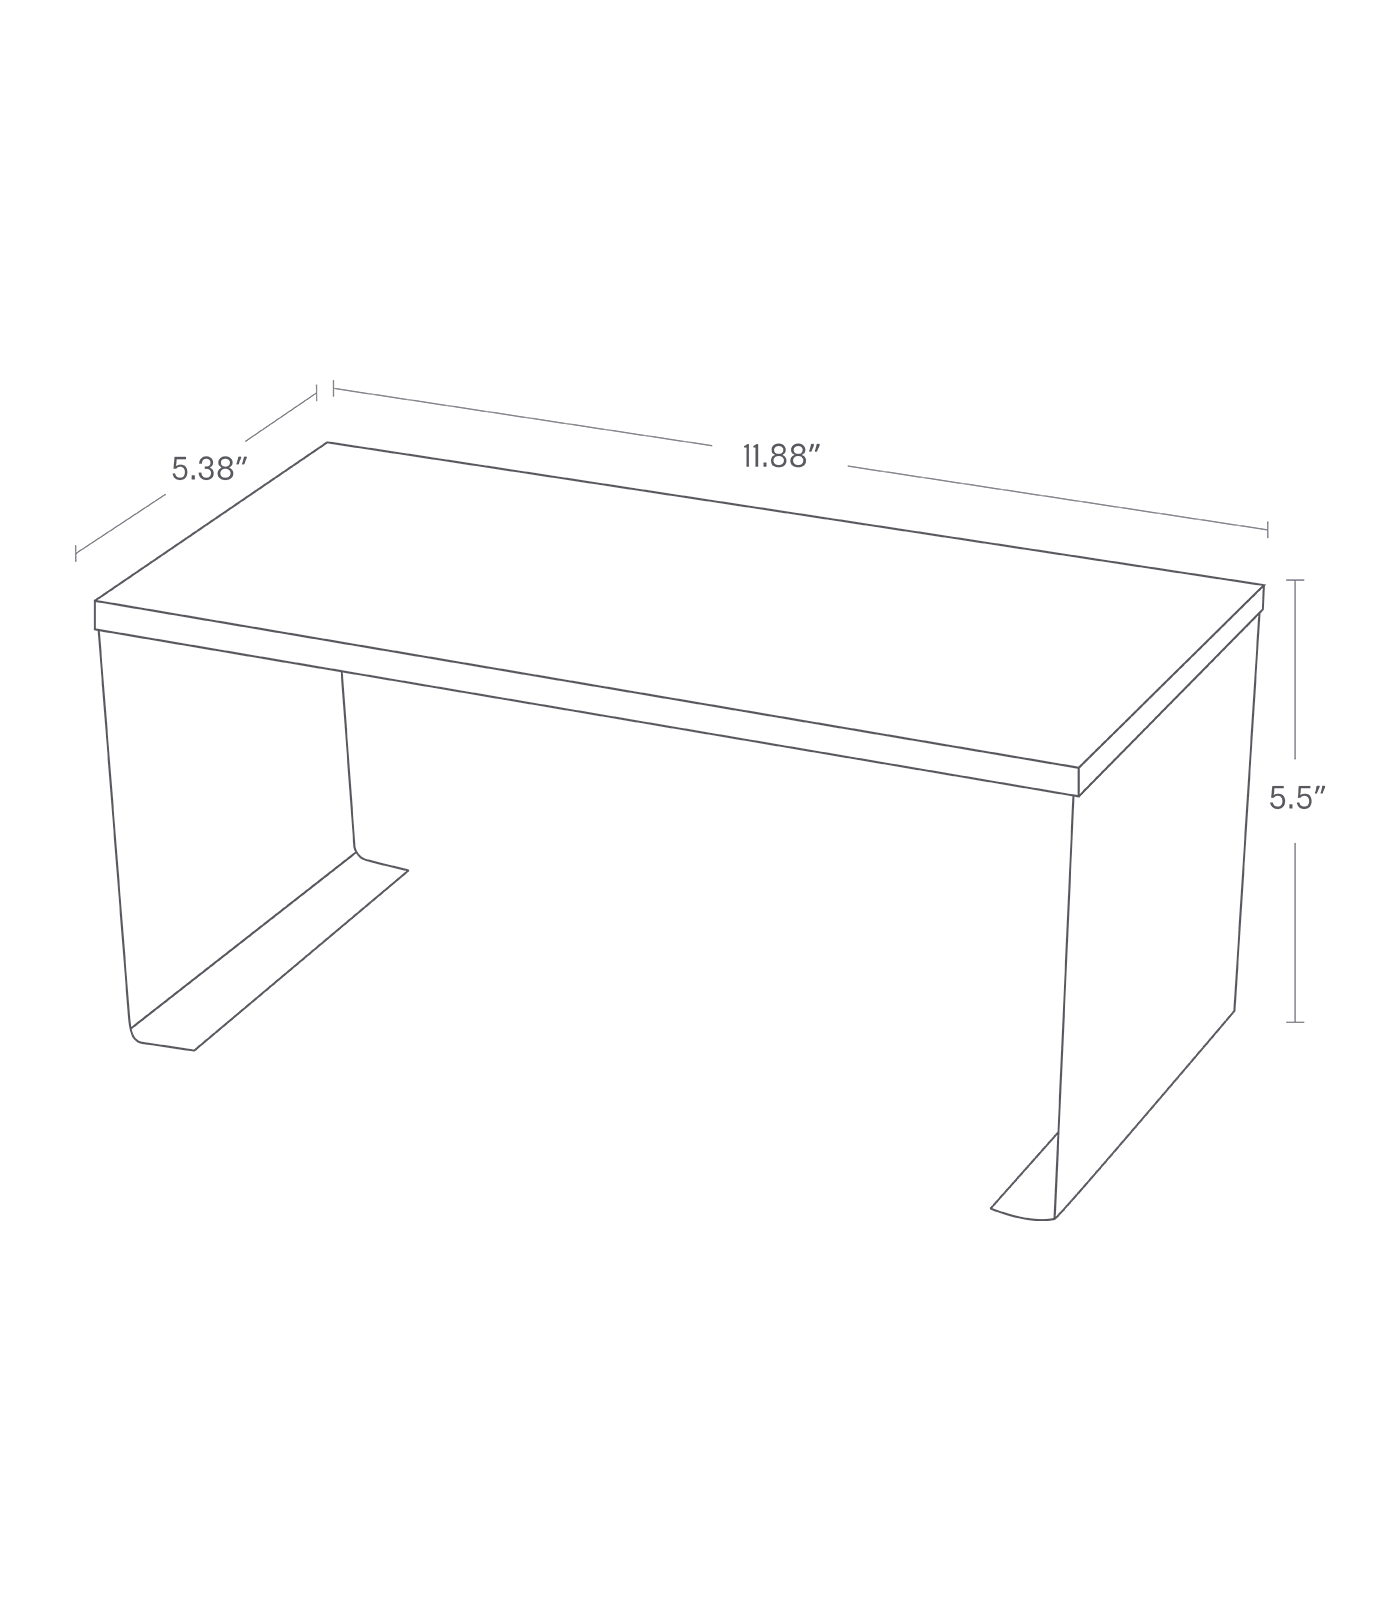 Dimension image for Stackable Countertop Shelf - Two Sizes on a white background including dimensions  L 5.51 x W 12.01 x H 5.71 inches